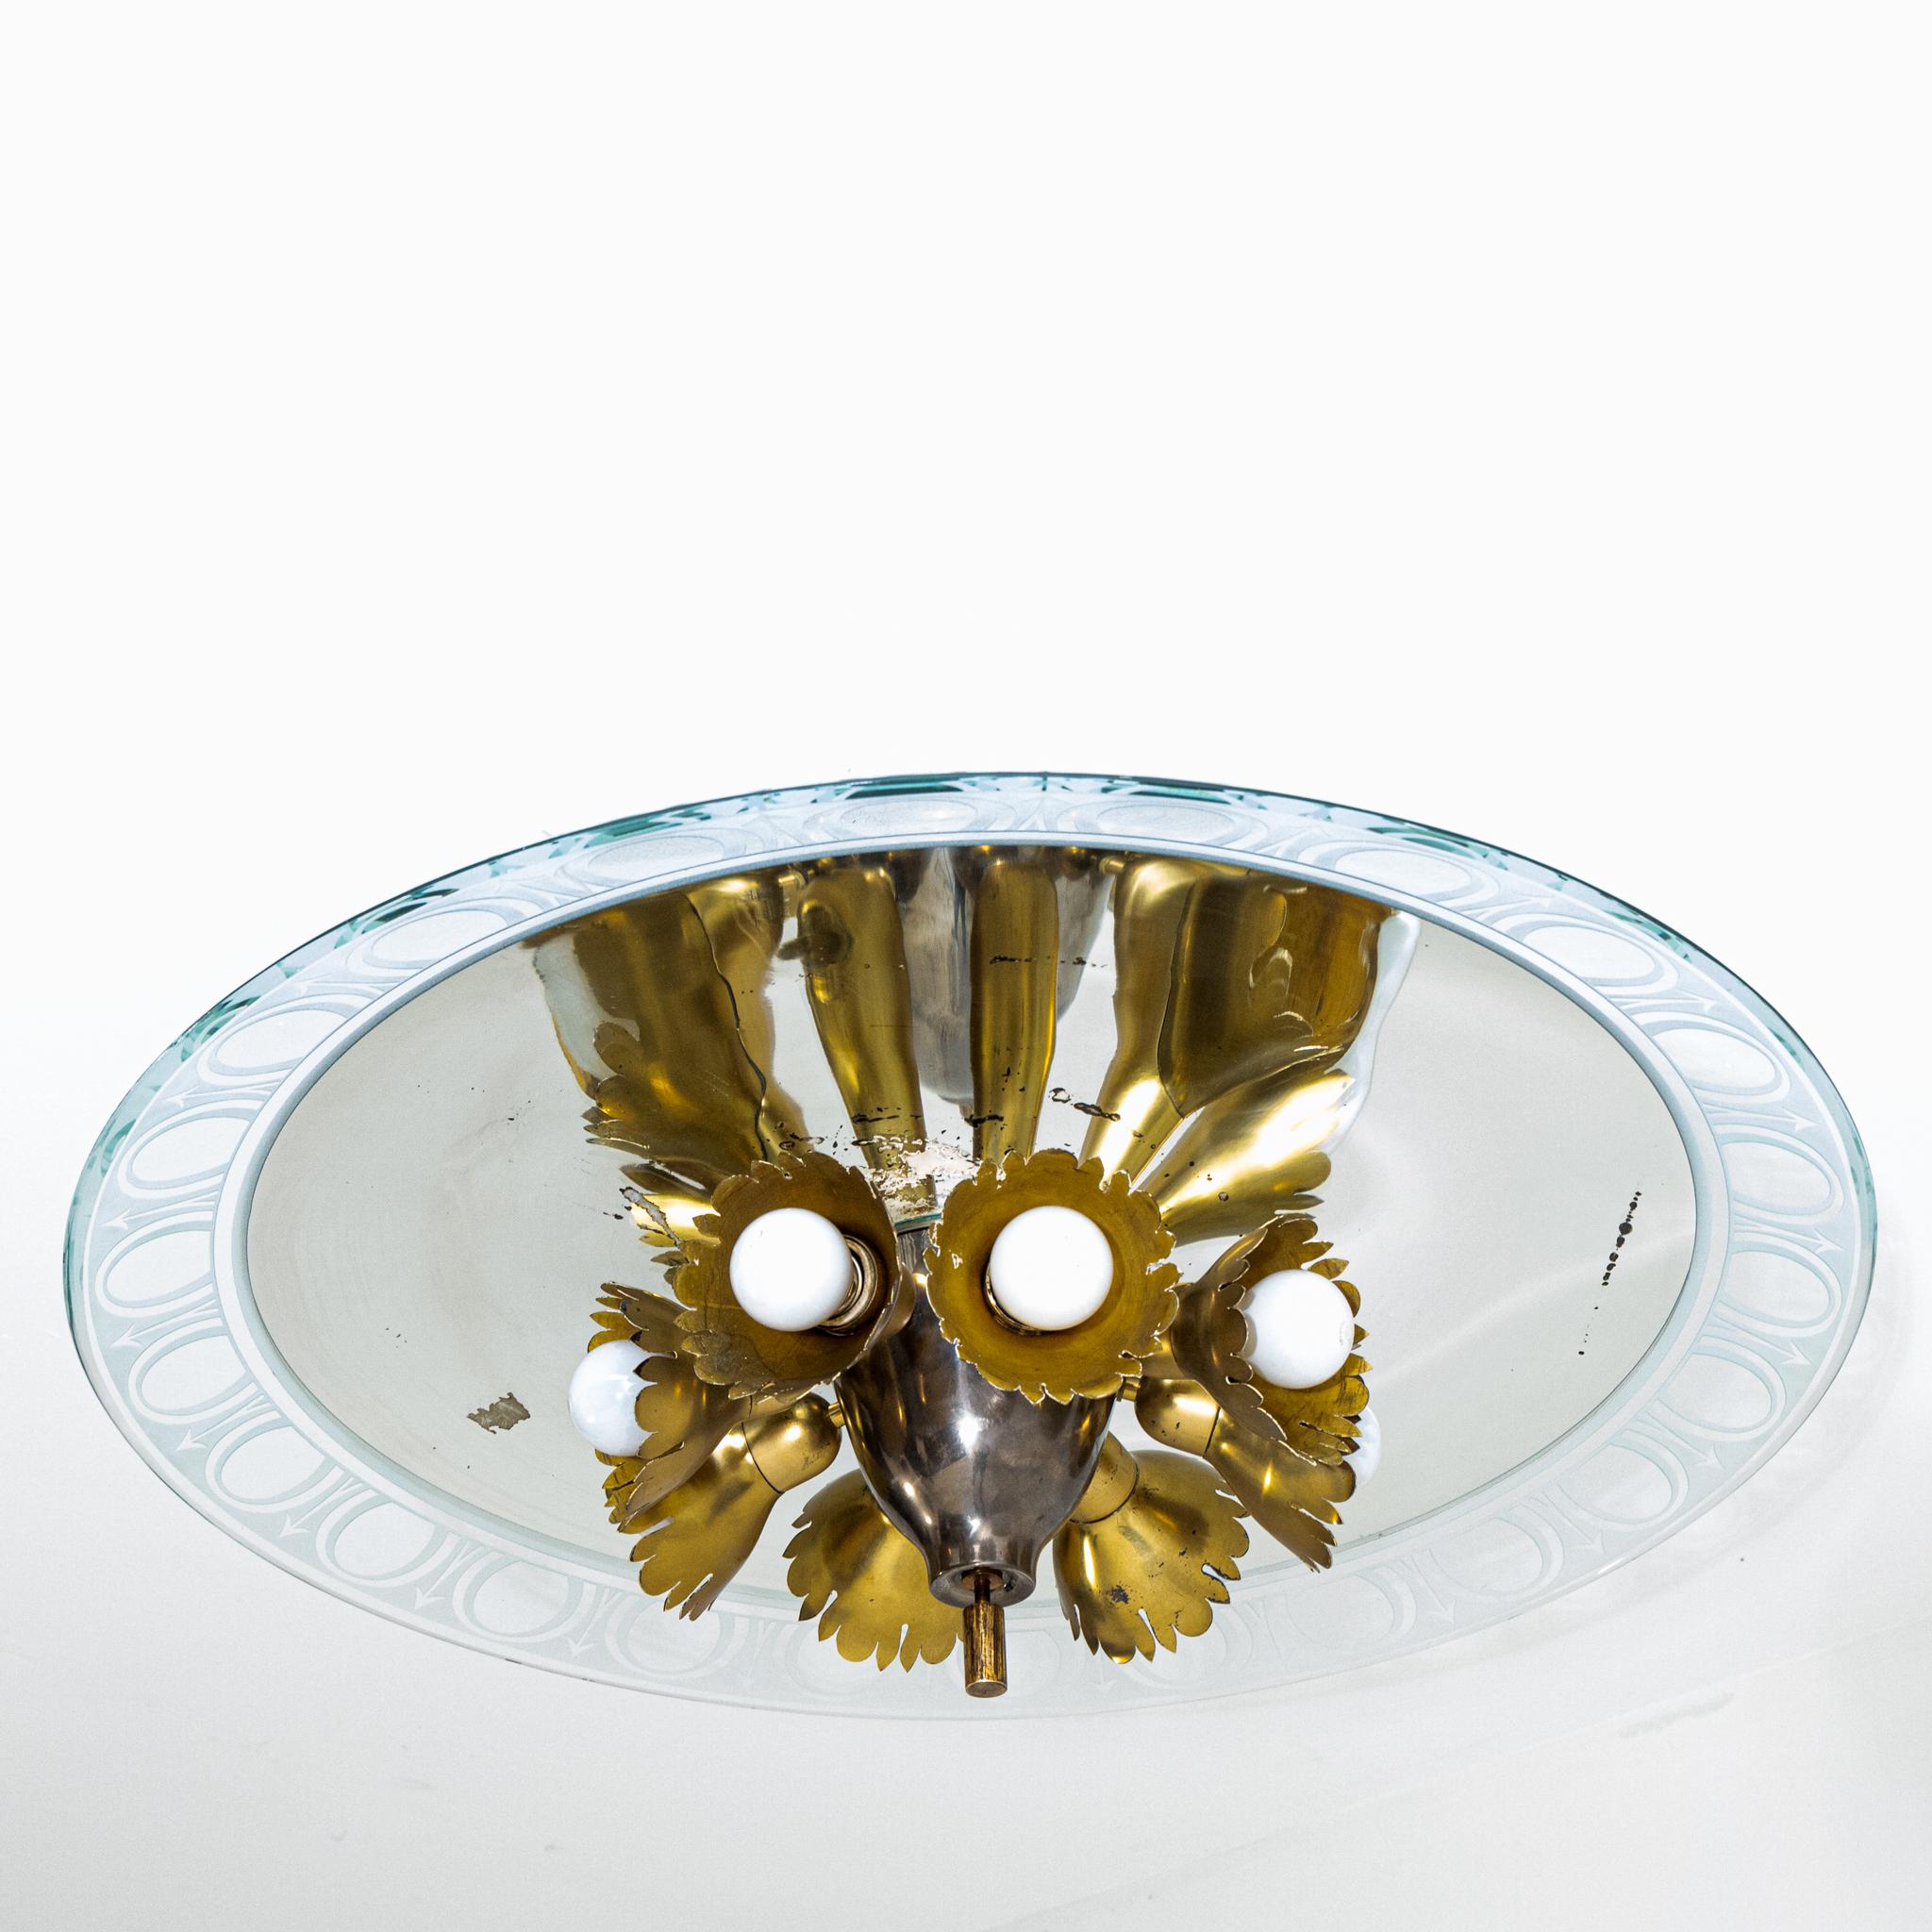 Ceiling lamp with bowl-shaped mirrored glass shade with decorative rim and leaf-shaped gold-patinated lampshades around the radially arranged sockets. The mirrored area with blind spots, the gold leaf shades are rubbed in places.